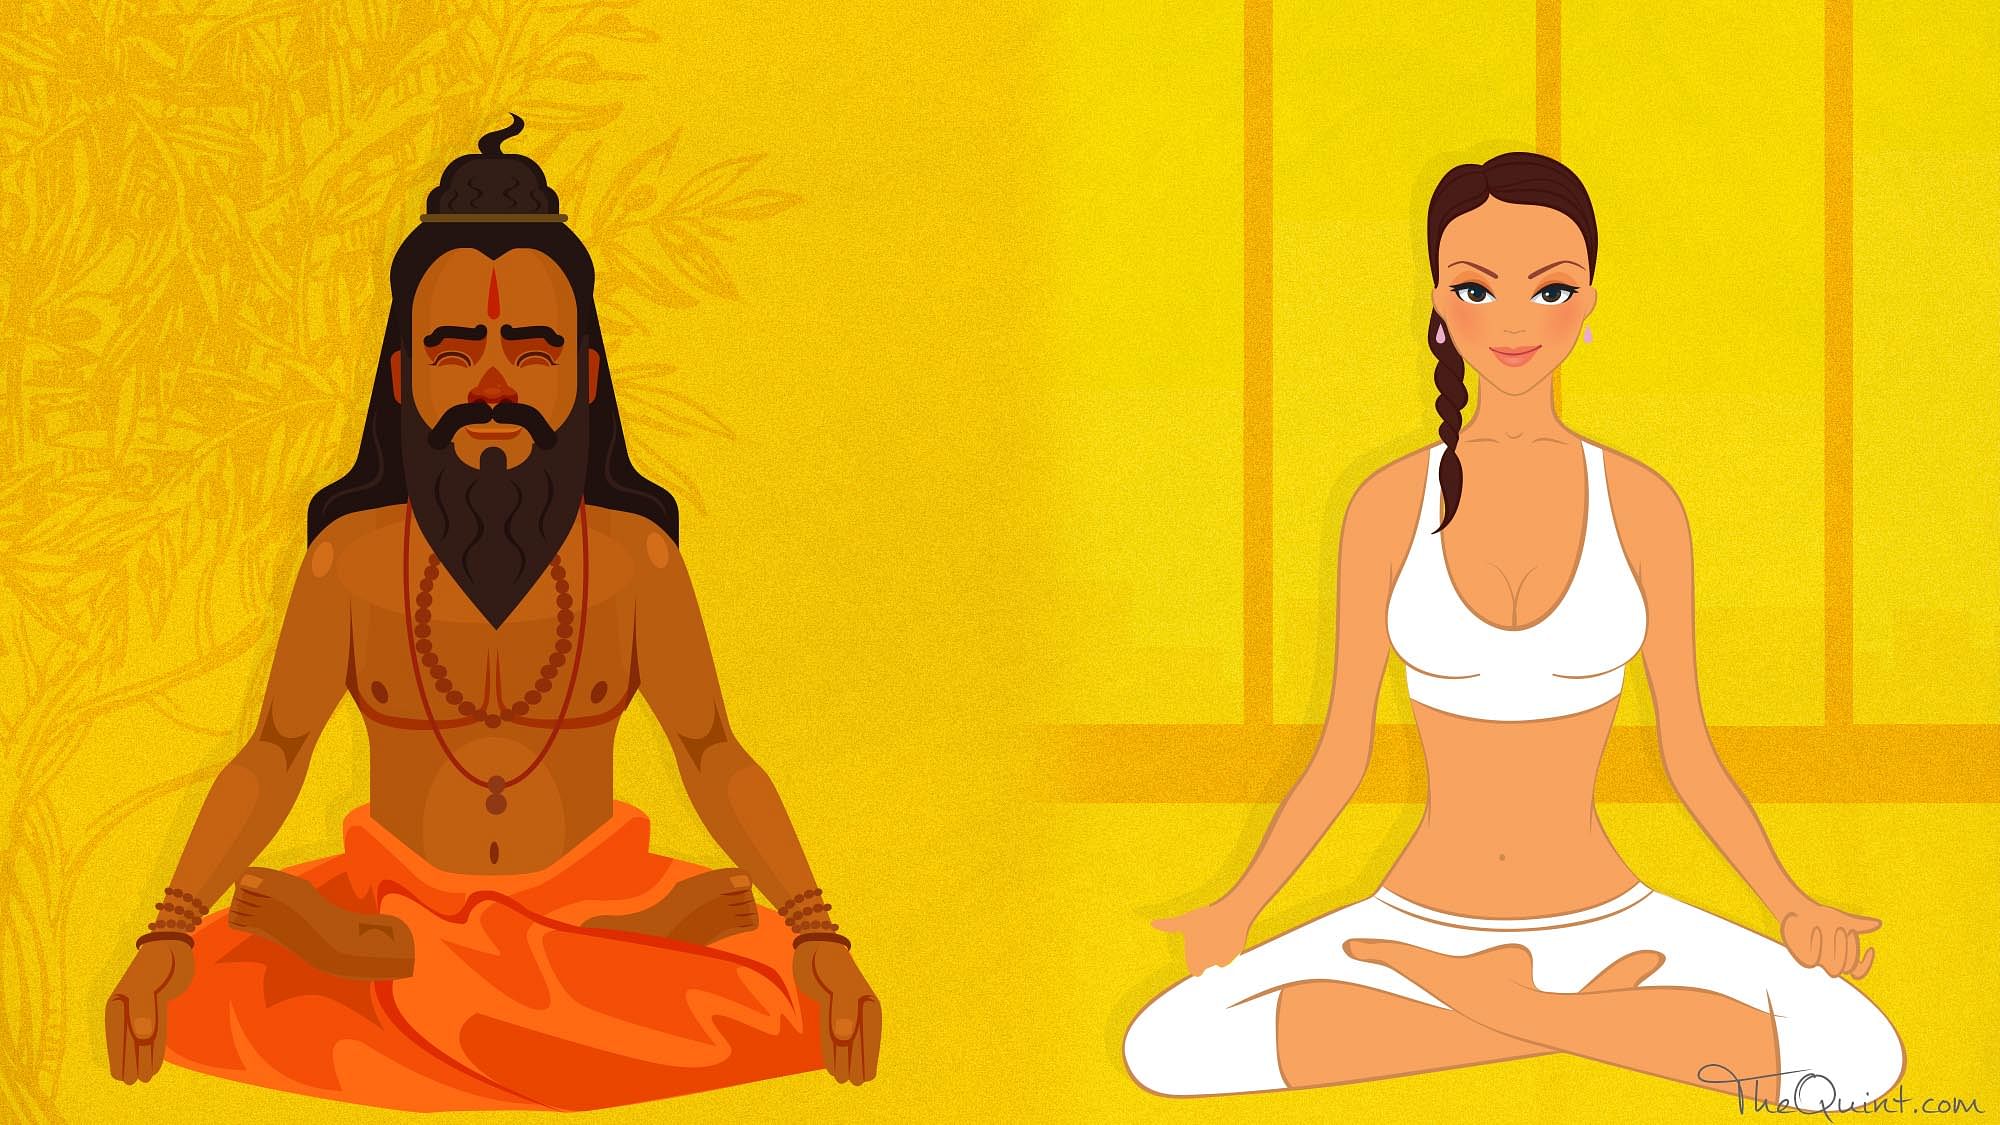 International Day of Yoga 2019: Where Did Yoga Come From? What’s The History of Yoga?